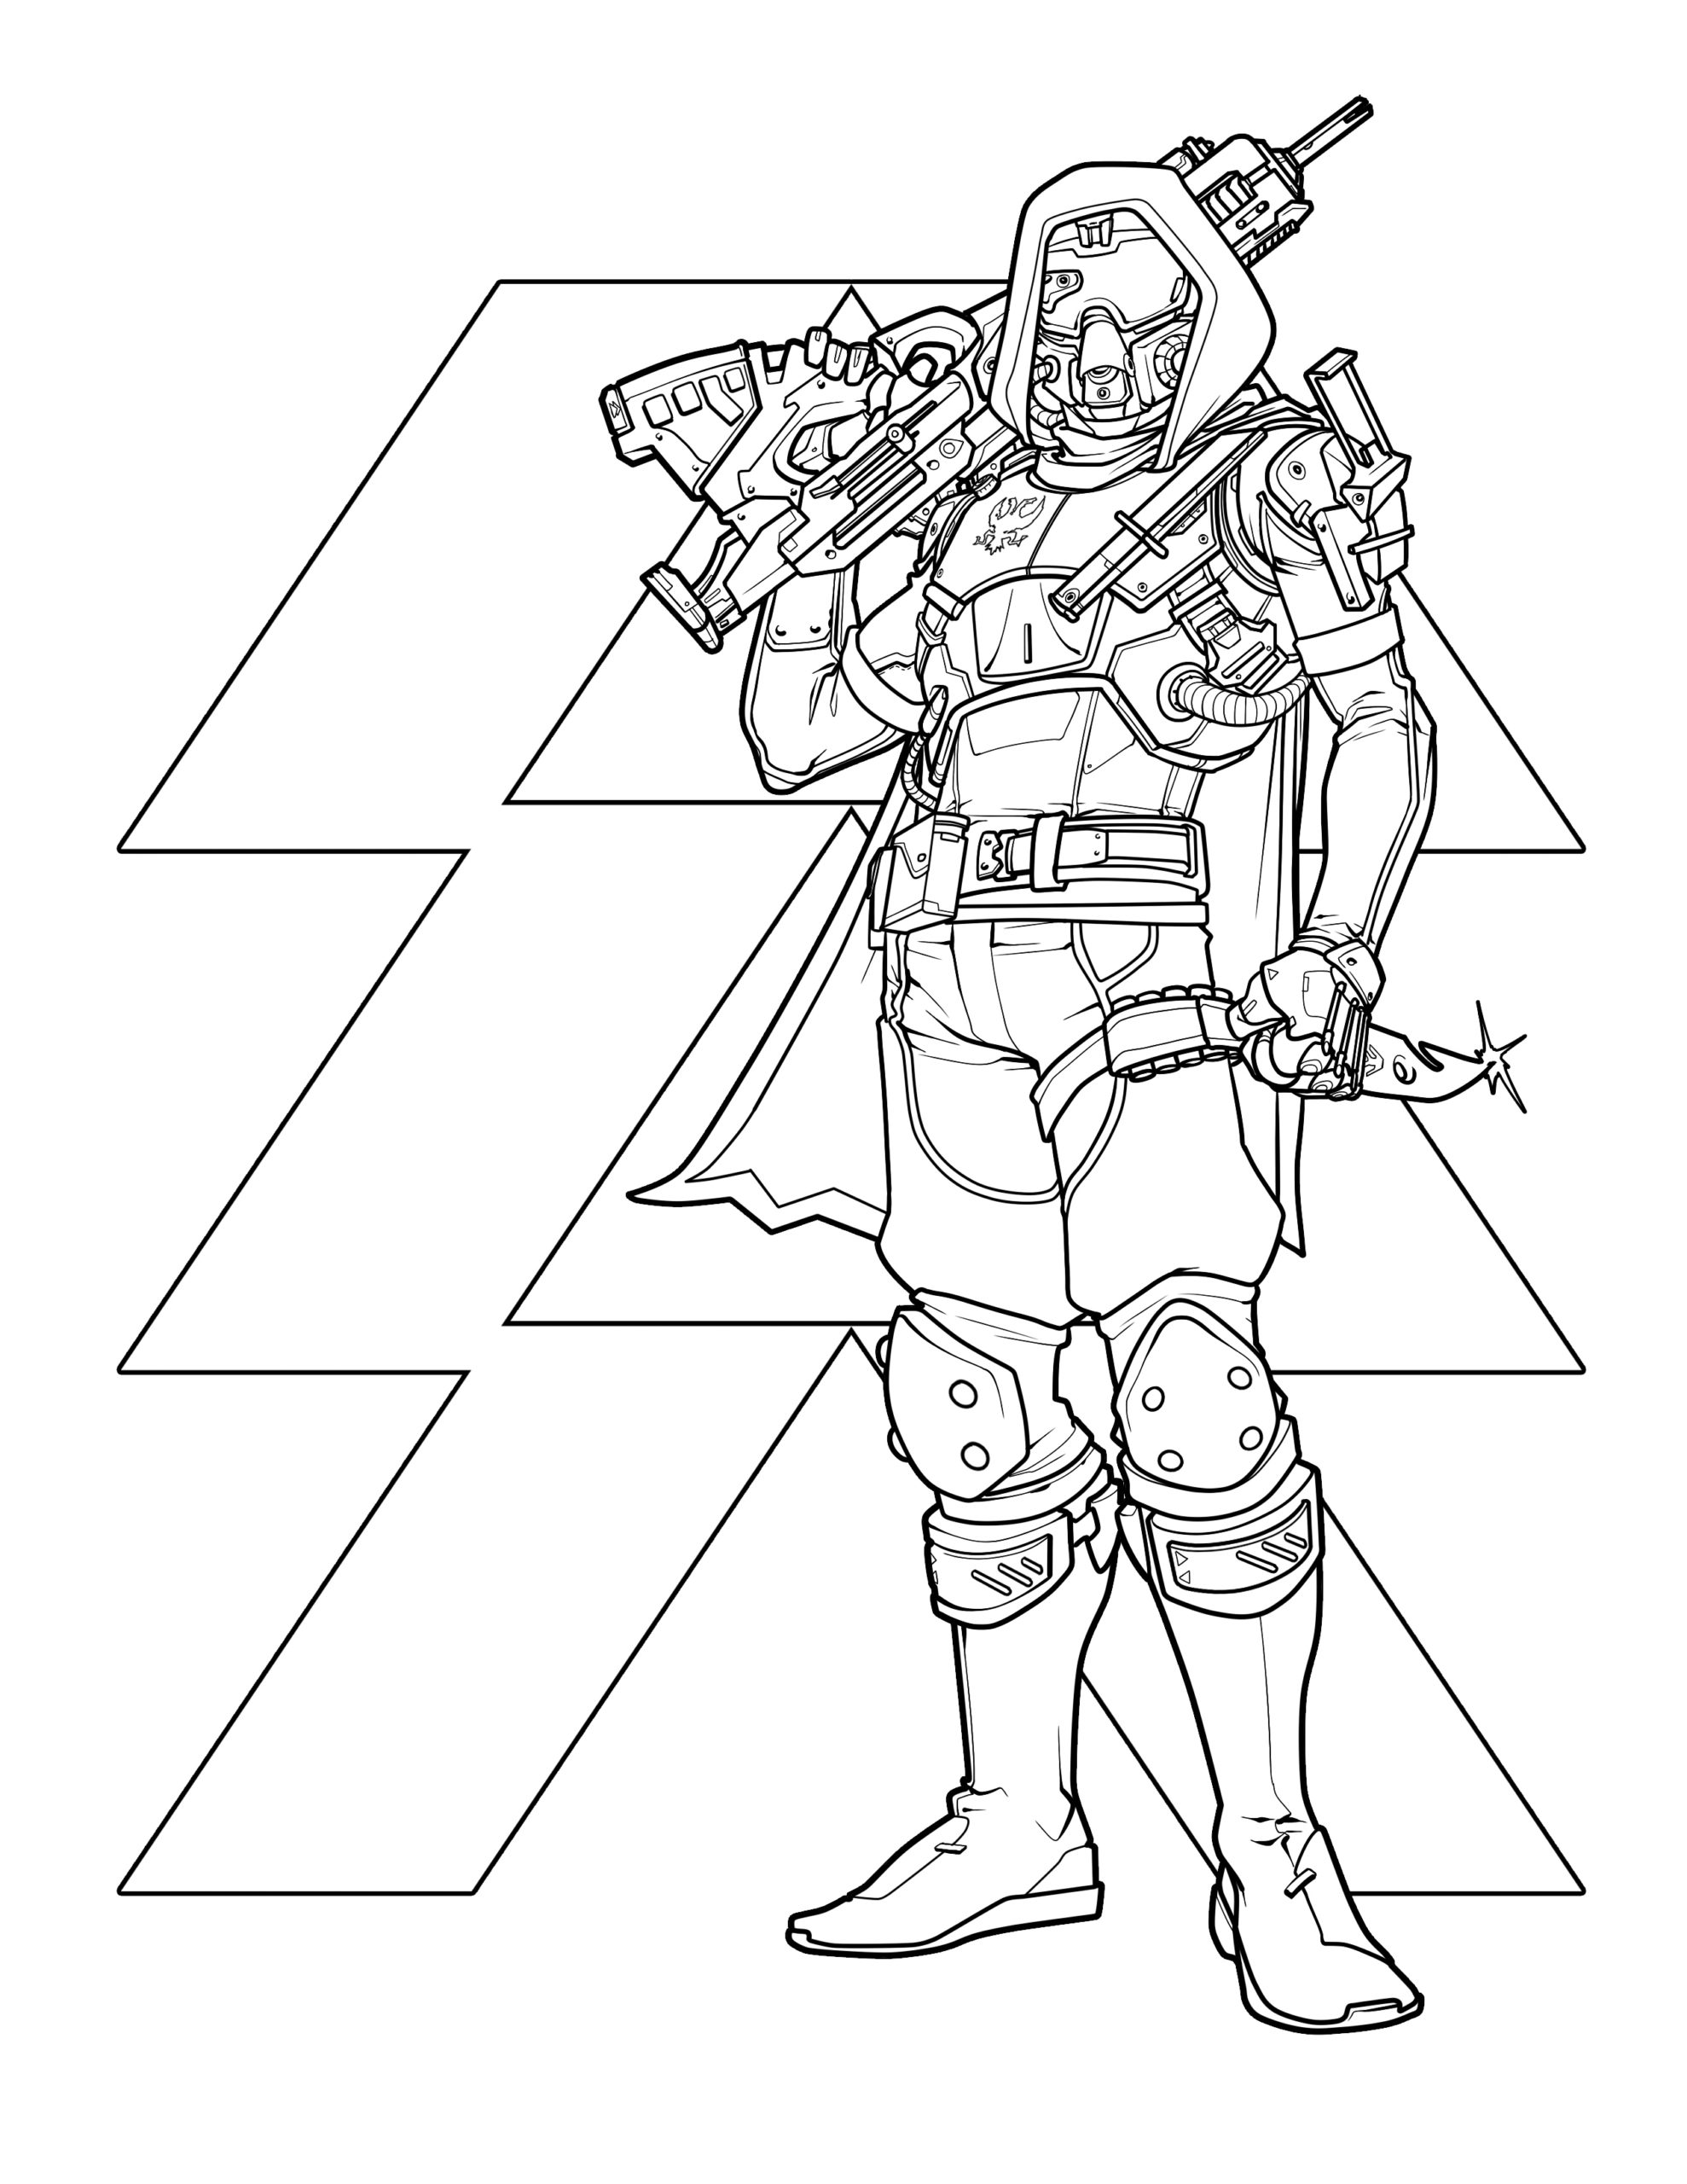 Official Destiny Colouring Book Looks More Relaxing Than Destiny